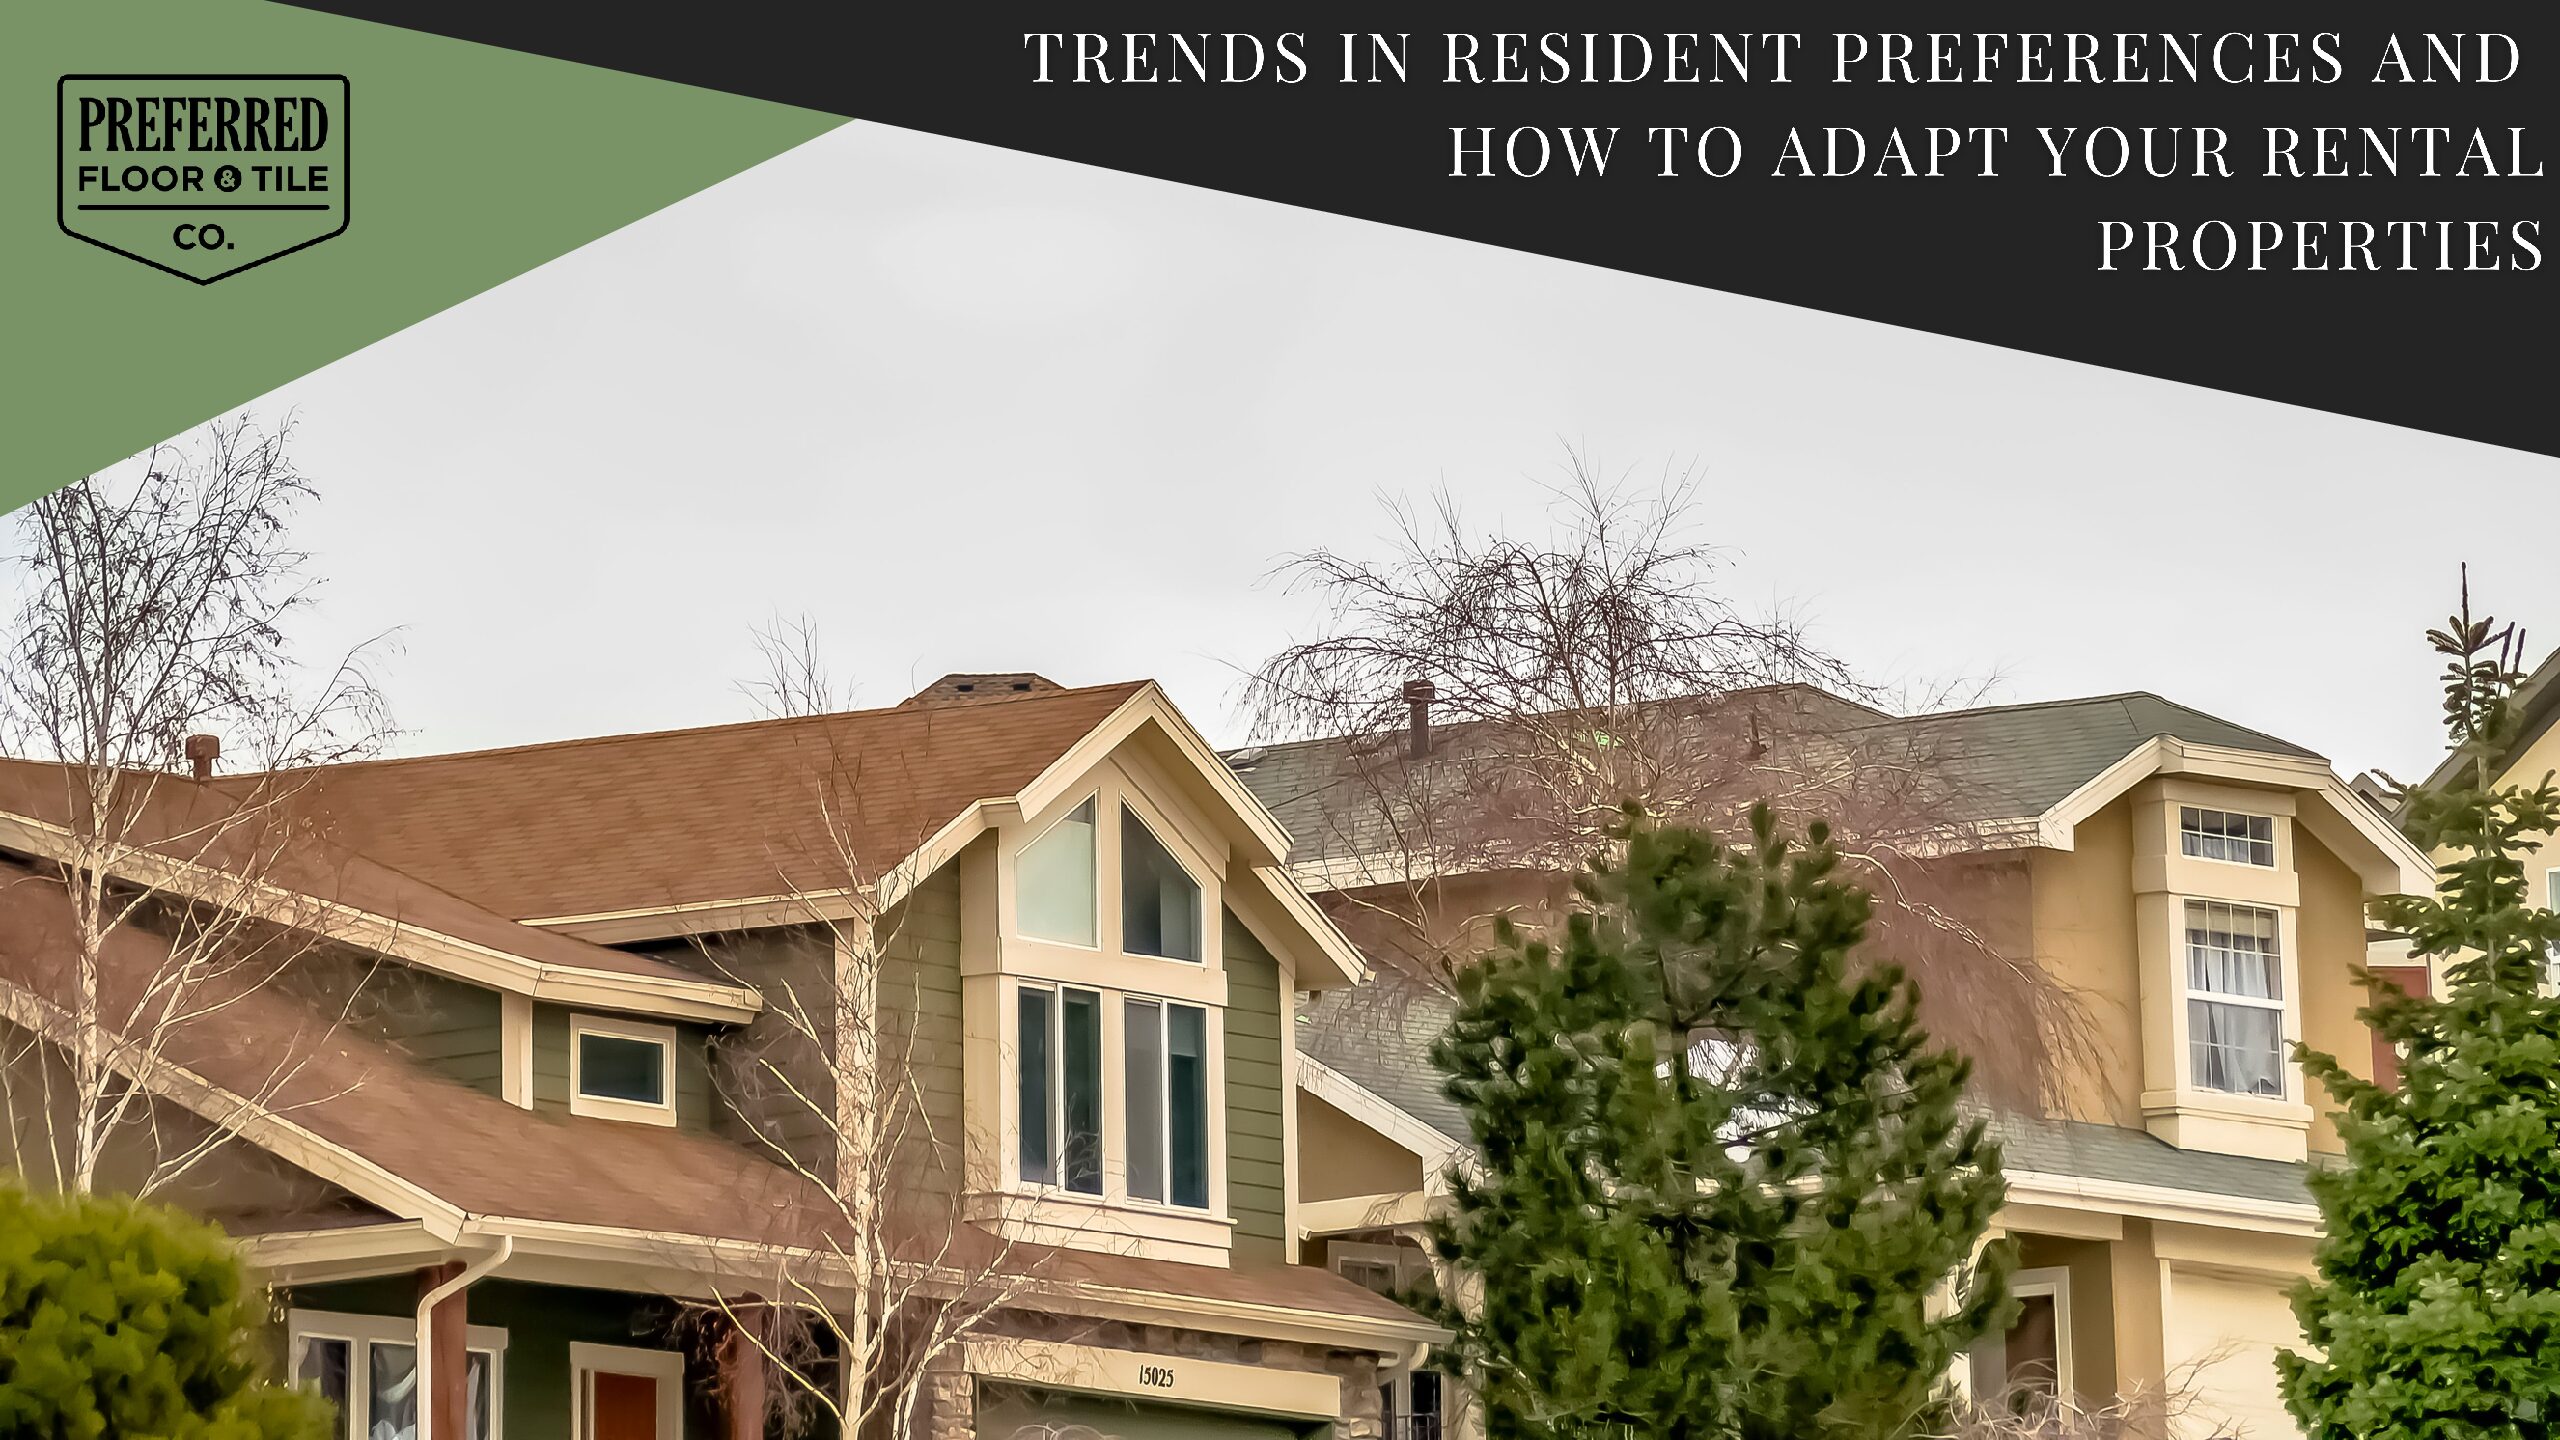 Trends in Resident Preferences and How to Adapt Your Rental Properties